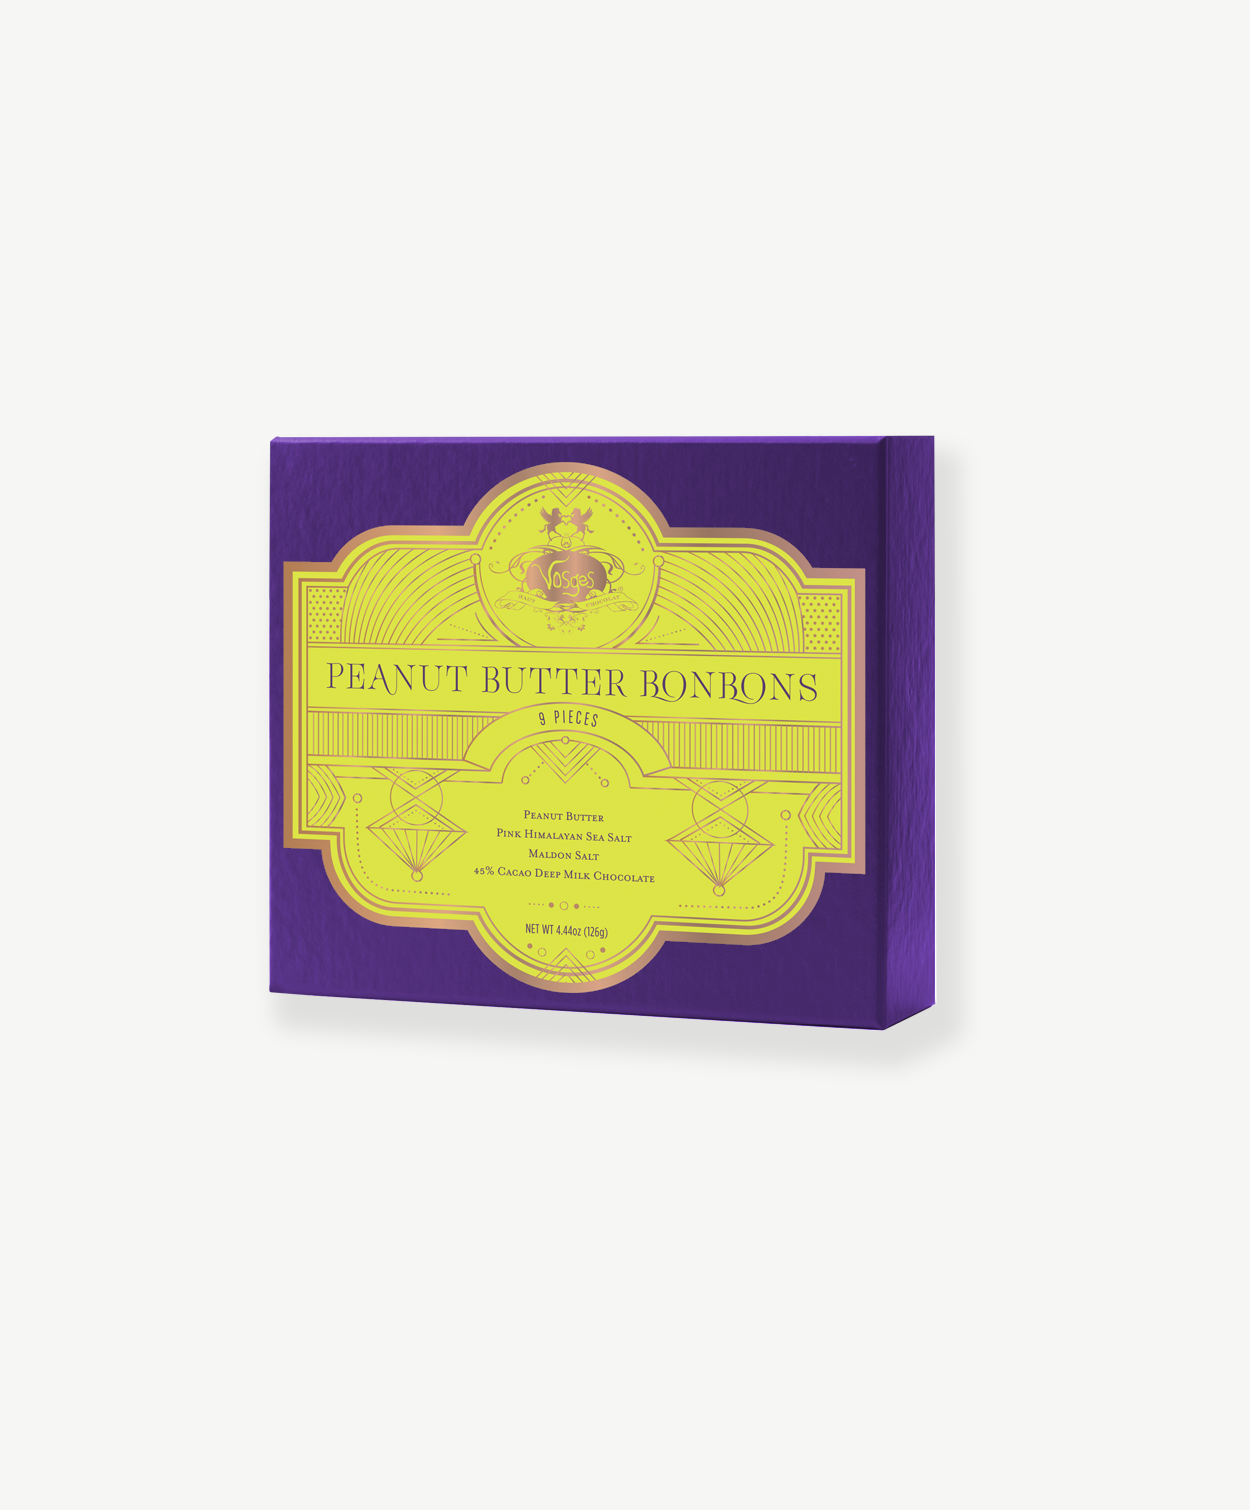 A purple Vosges chocolate box with a bright green label reading. "Peanut Butter Bonbons" stands upright on a white background.